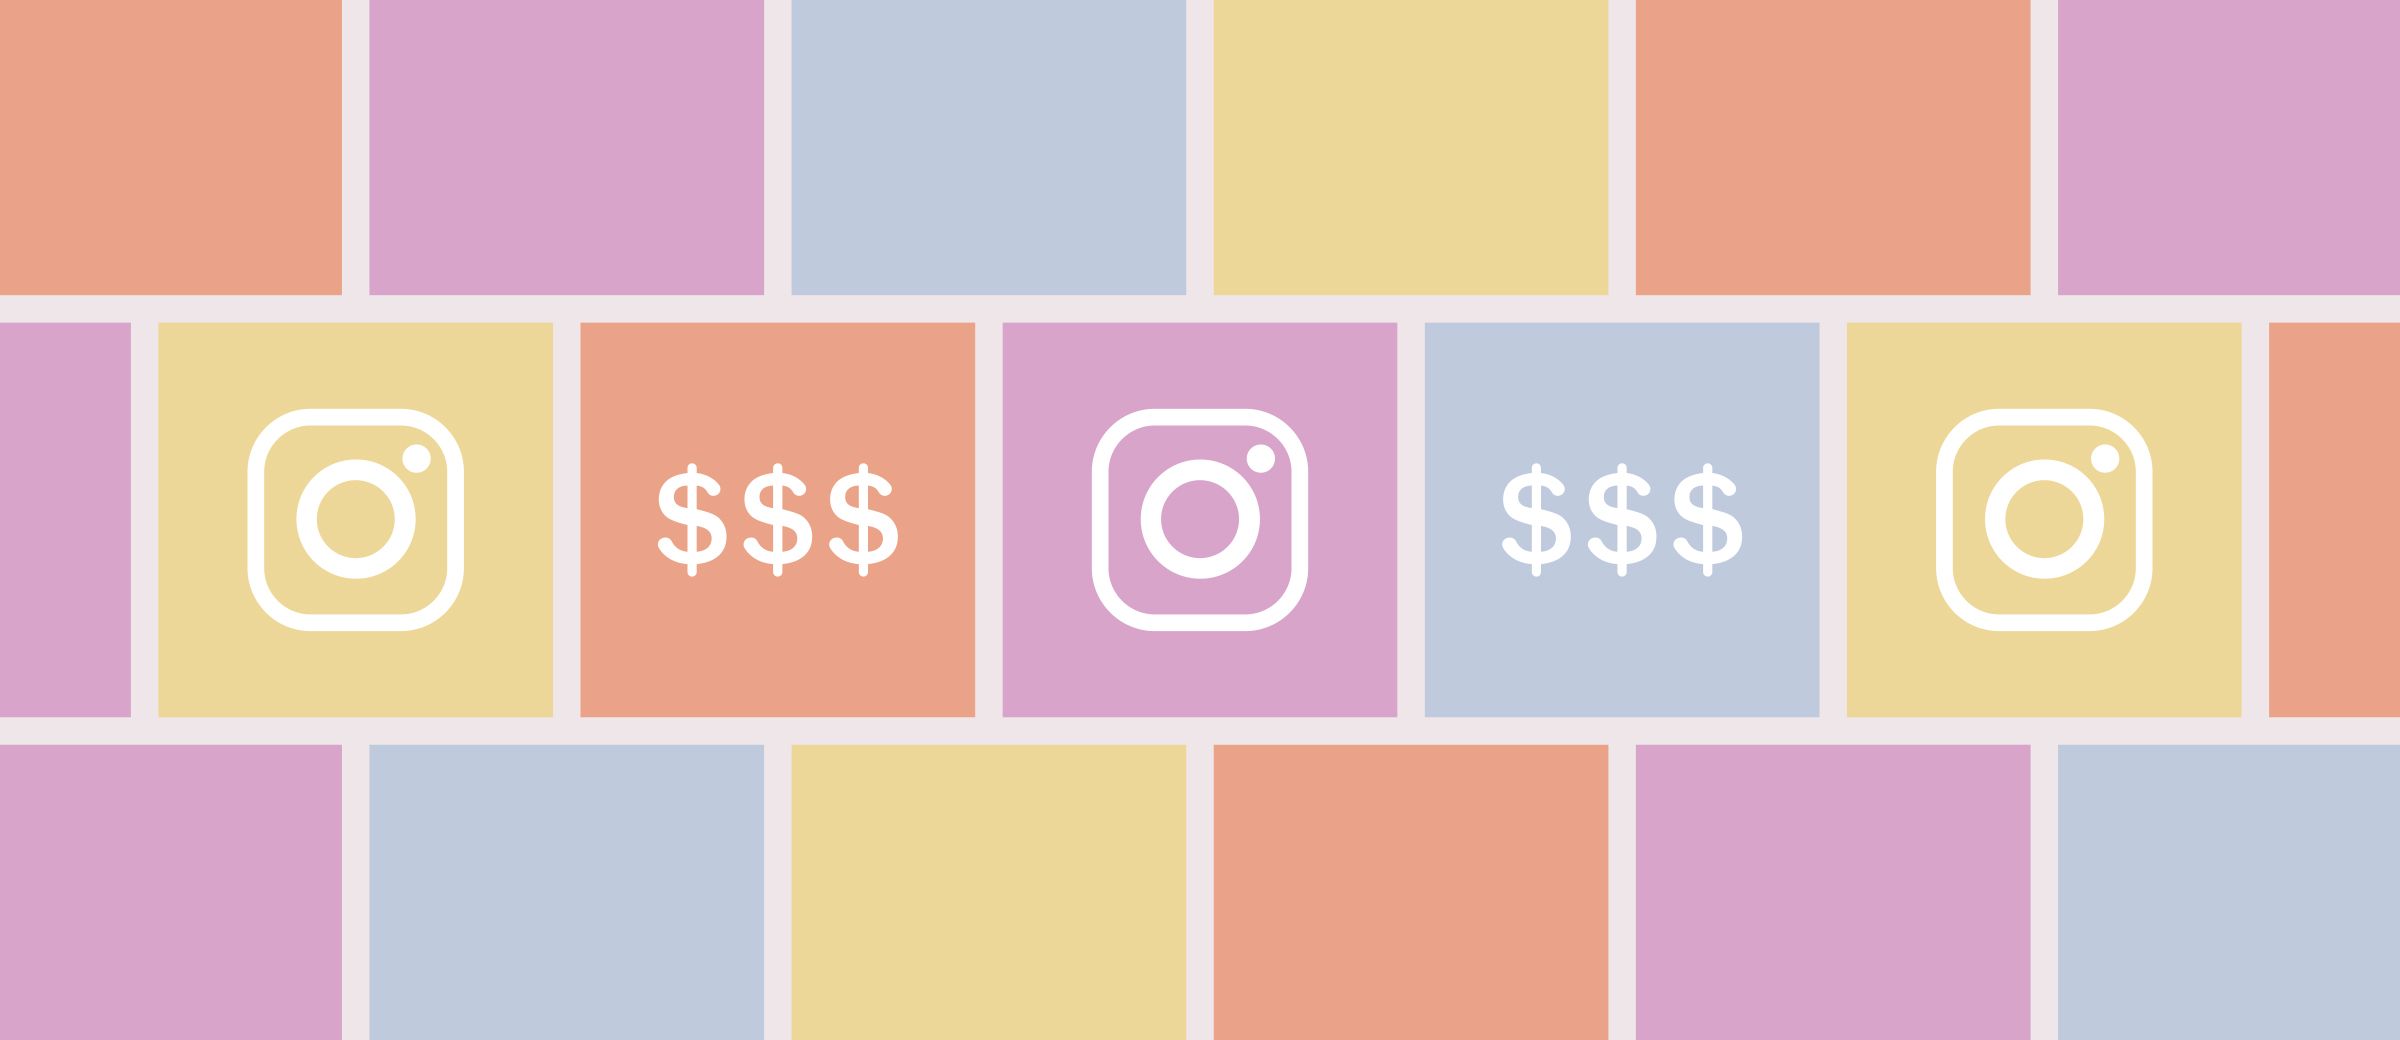 Read about How to Monetize Instagram: 3 Tips for Beginners, on PLANOLY